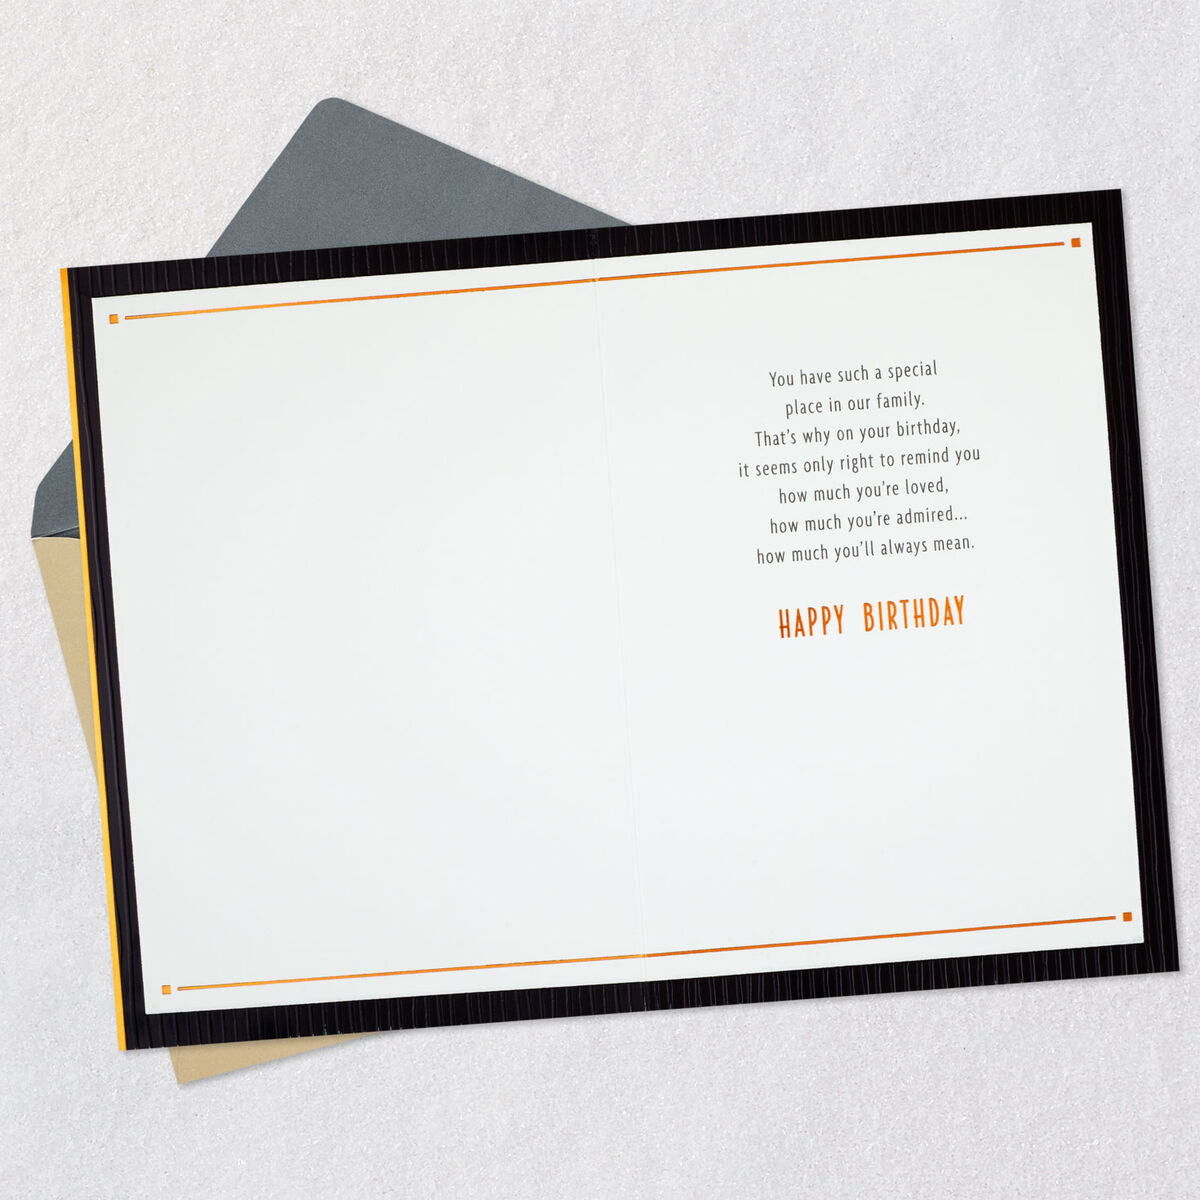 loved-and-admired-birthday-card-for-son-in-law-greeting-cards-hallmark